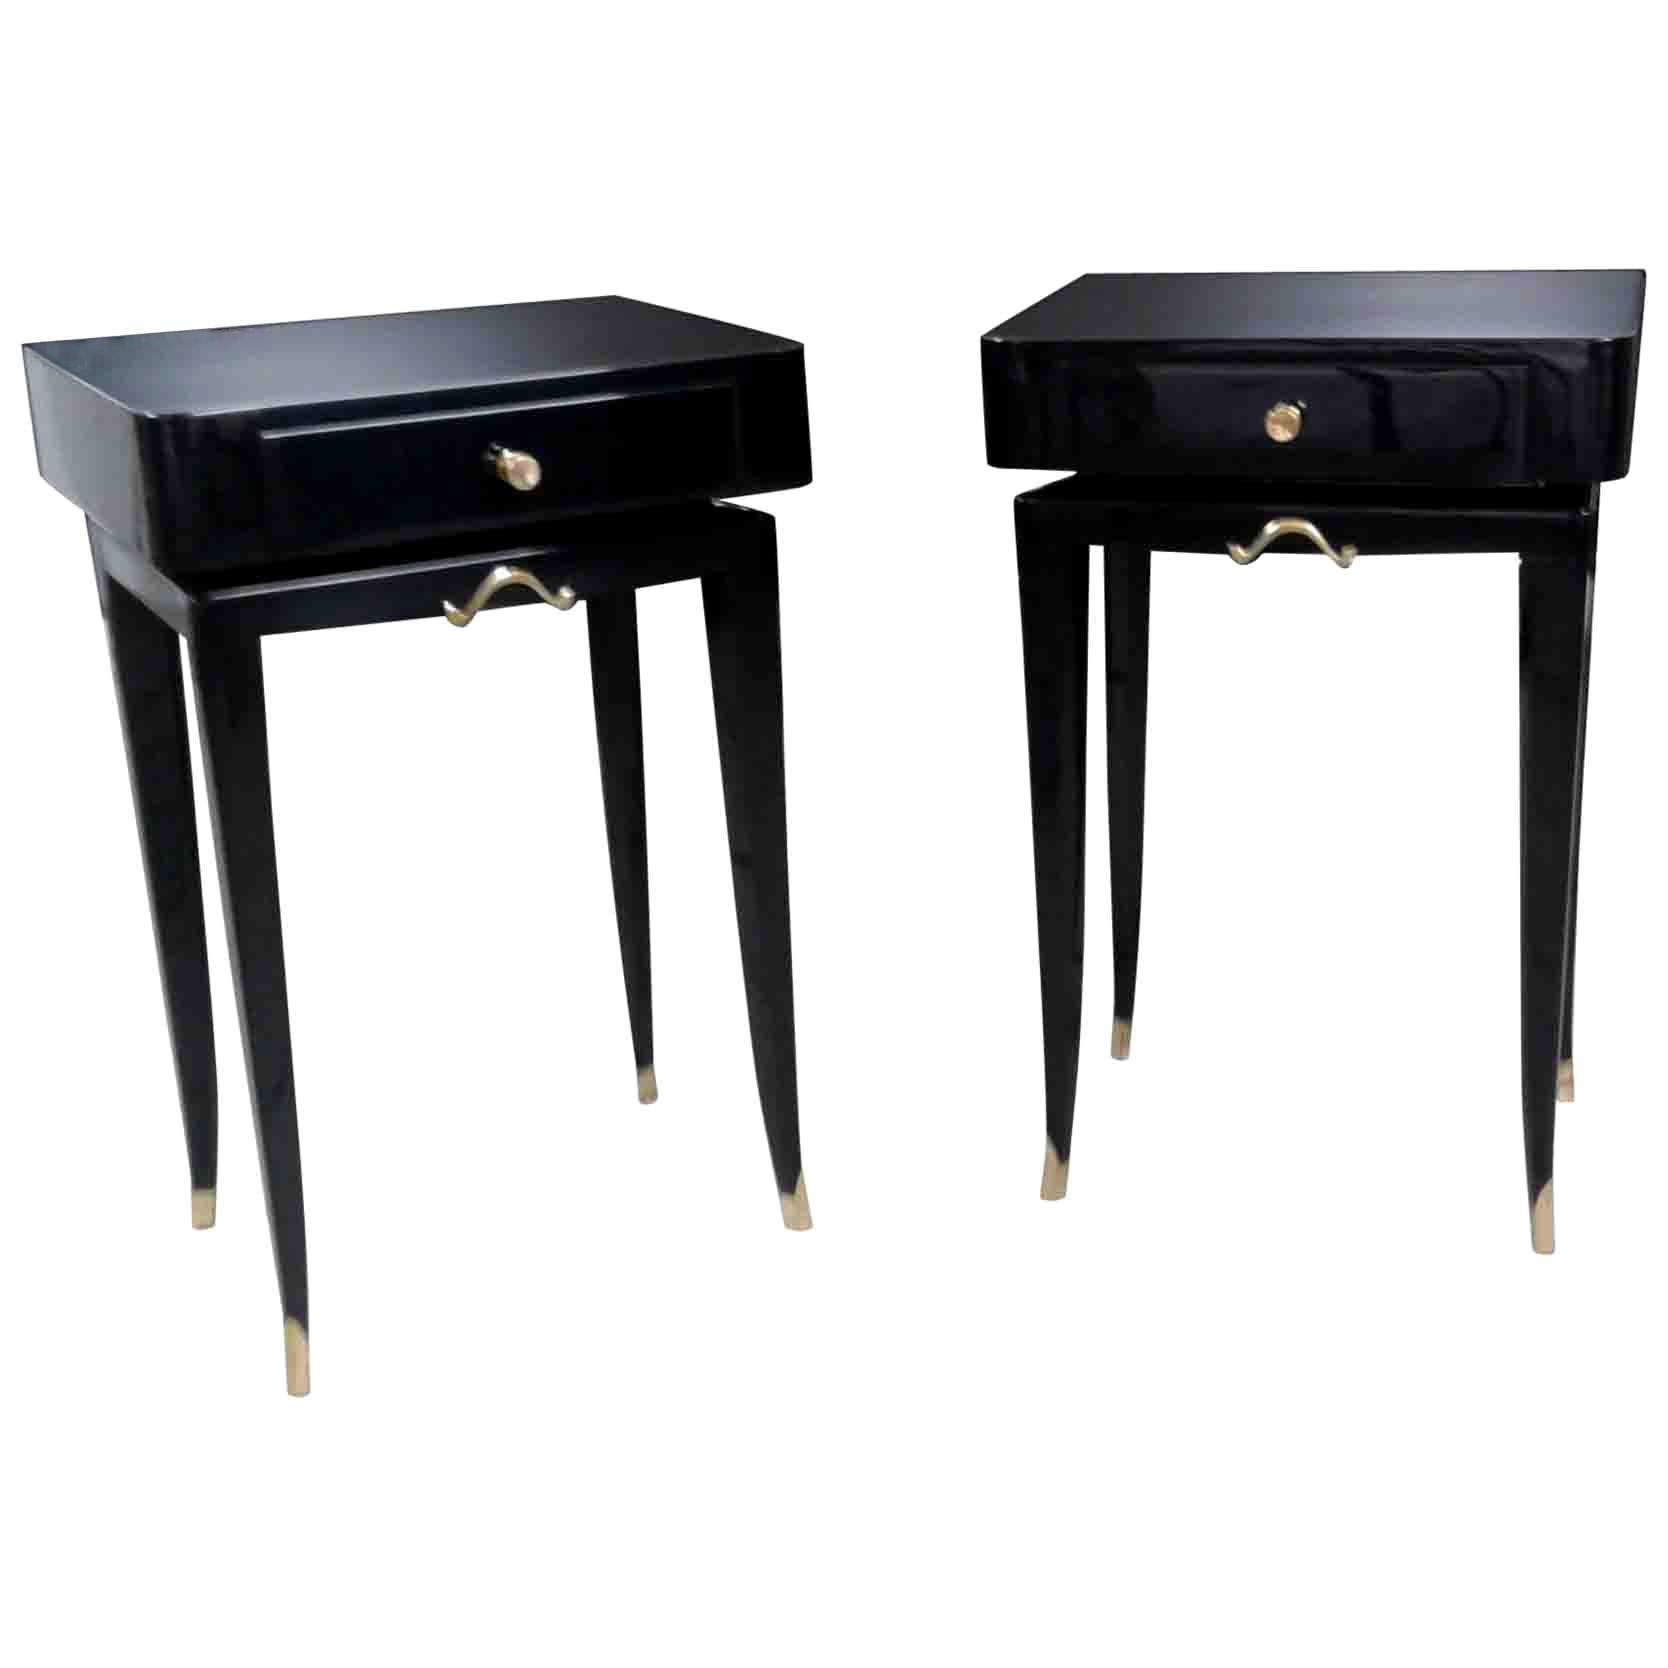 Pair of Bedside or Sofa End Tables in Black Lacquer by M. Rinck